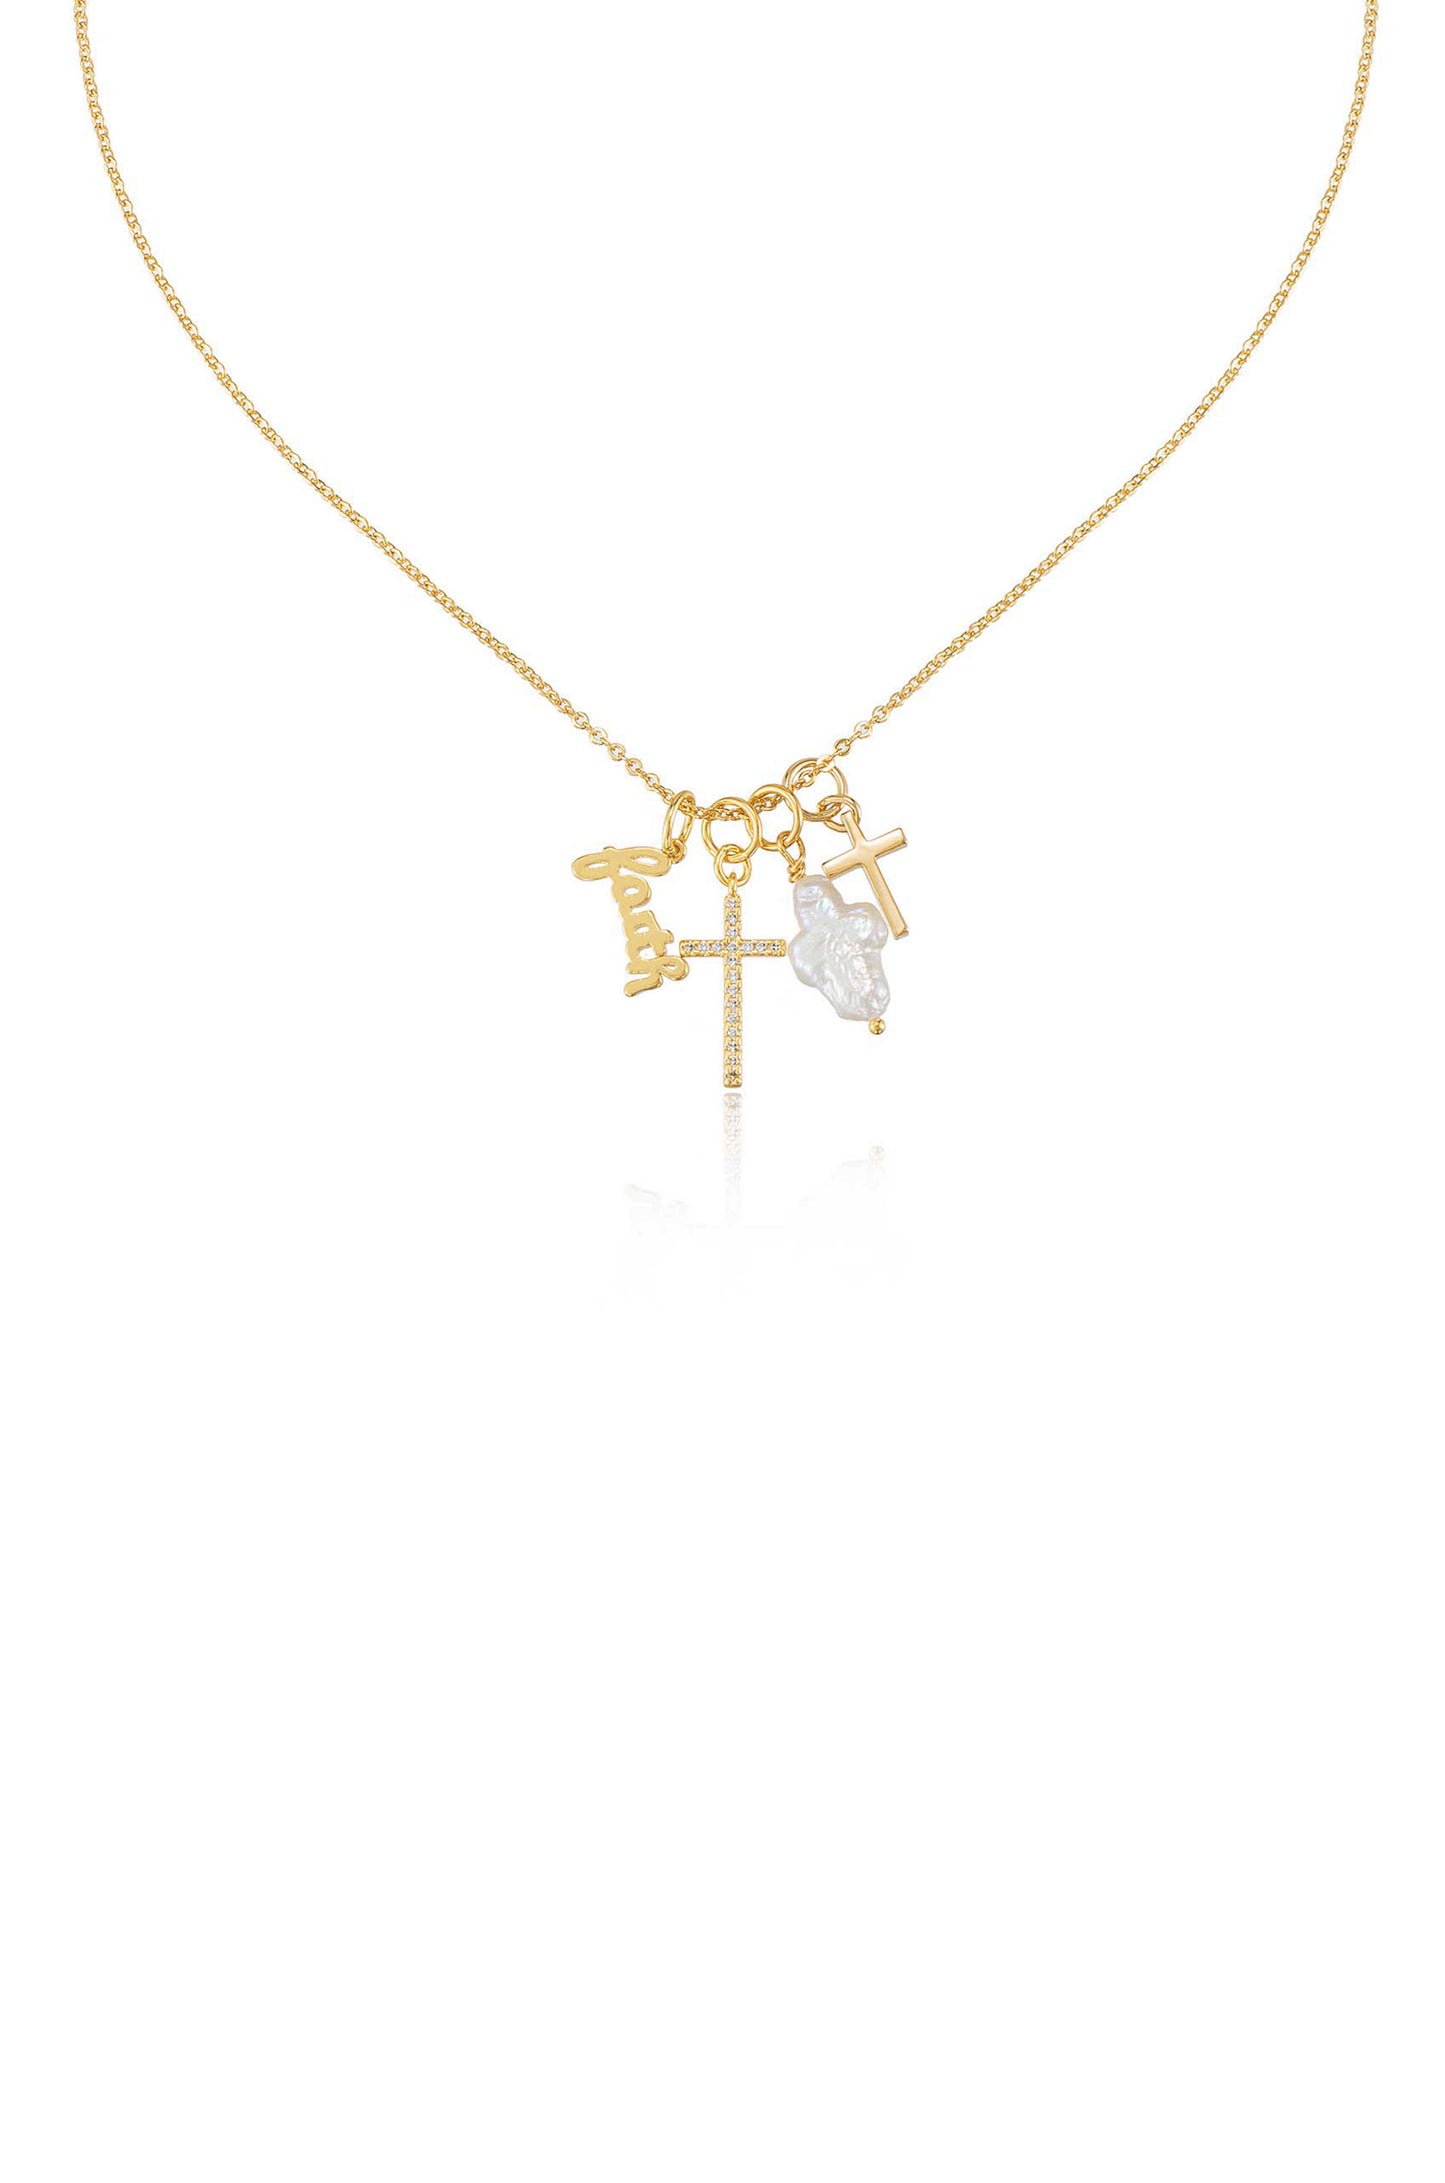 Gotta Have Faith 18k Gold Plated Interchangeable Charm Necklace